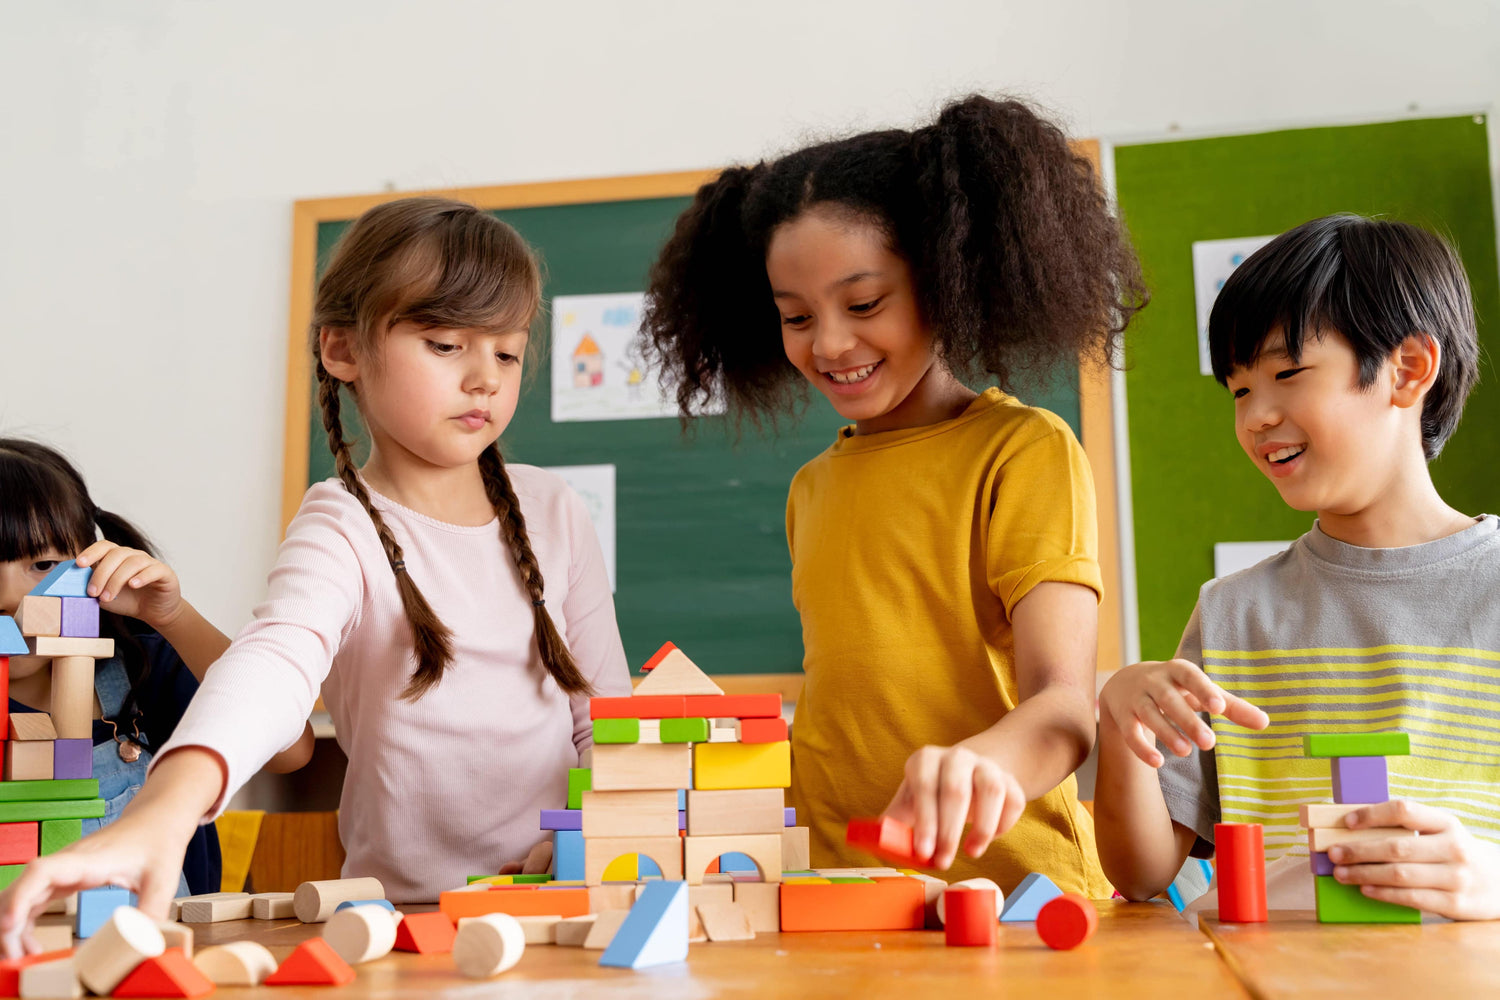 Kids Playing in Classroom with Building Blocks 